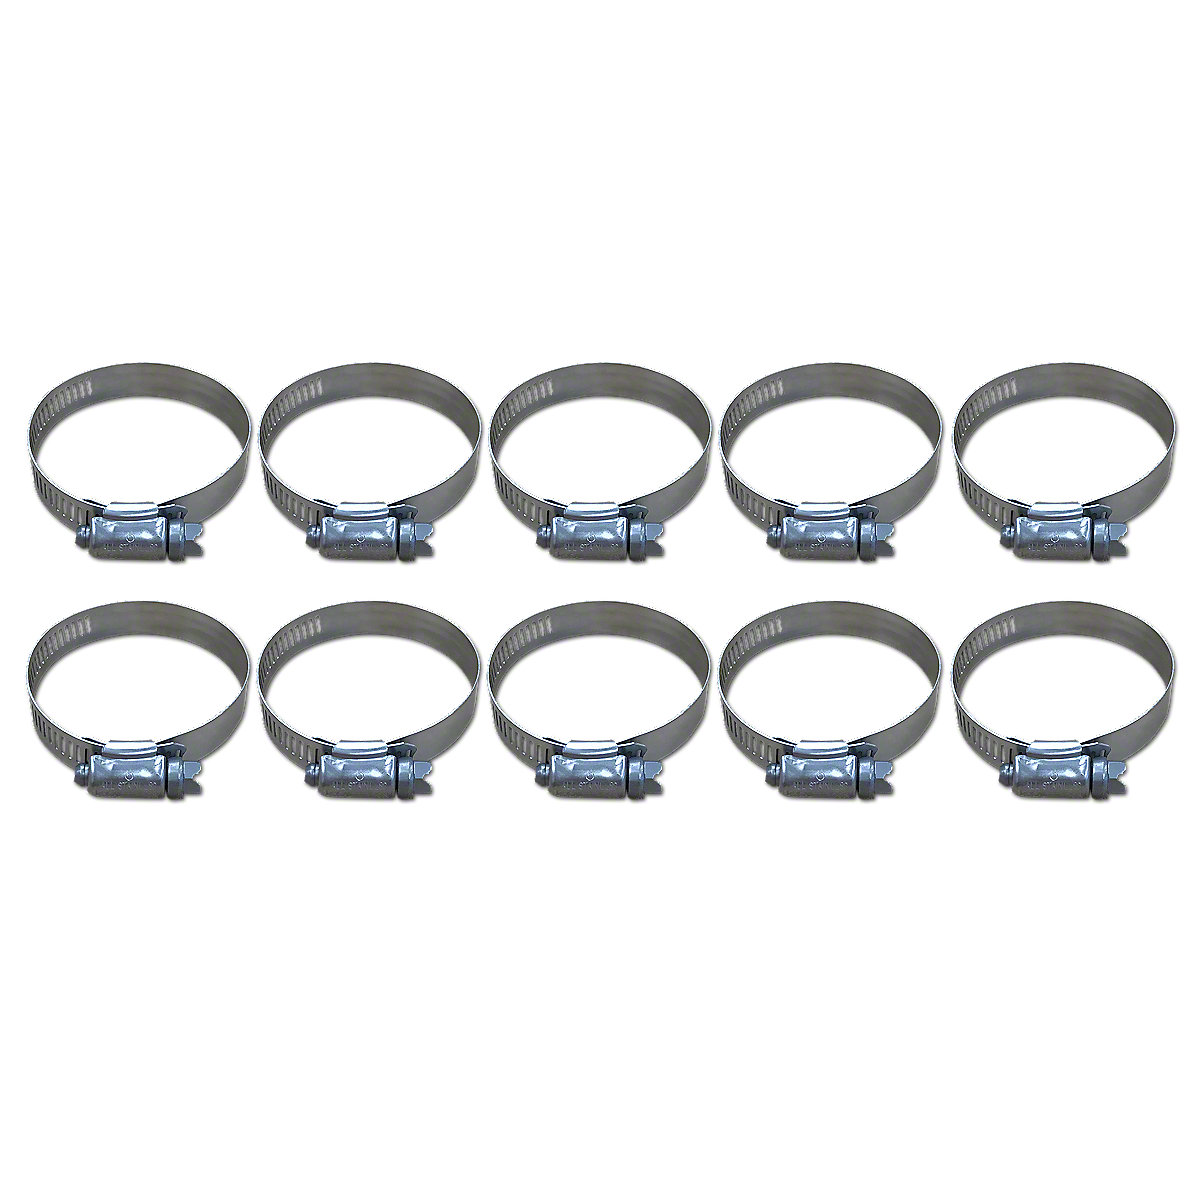 Worm Drive Hose Clamps 1.5-2.5 inch